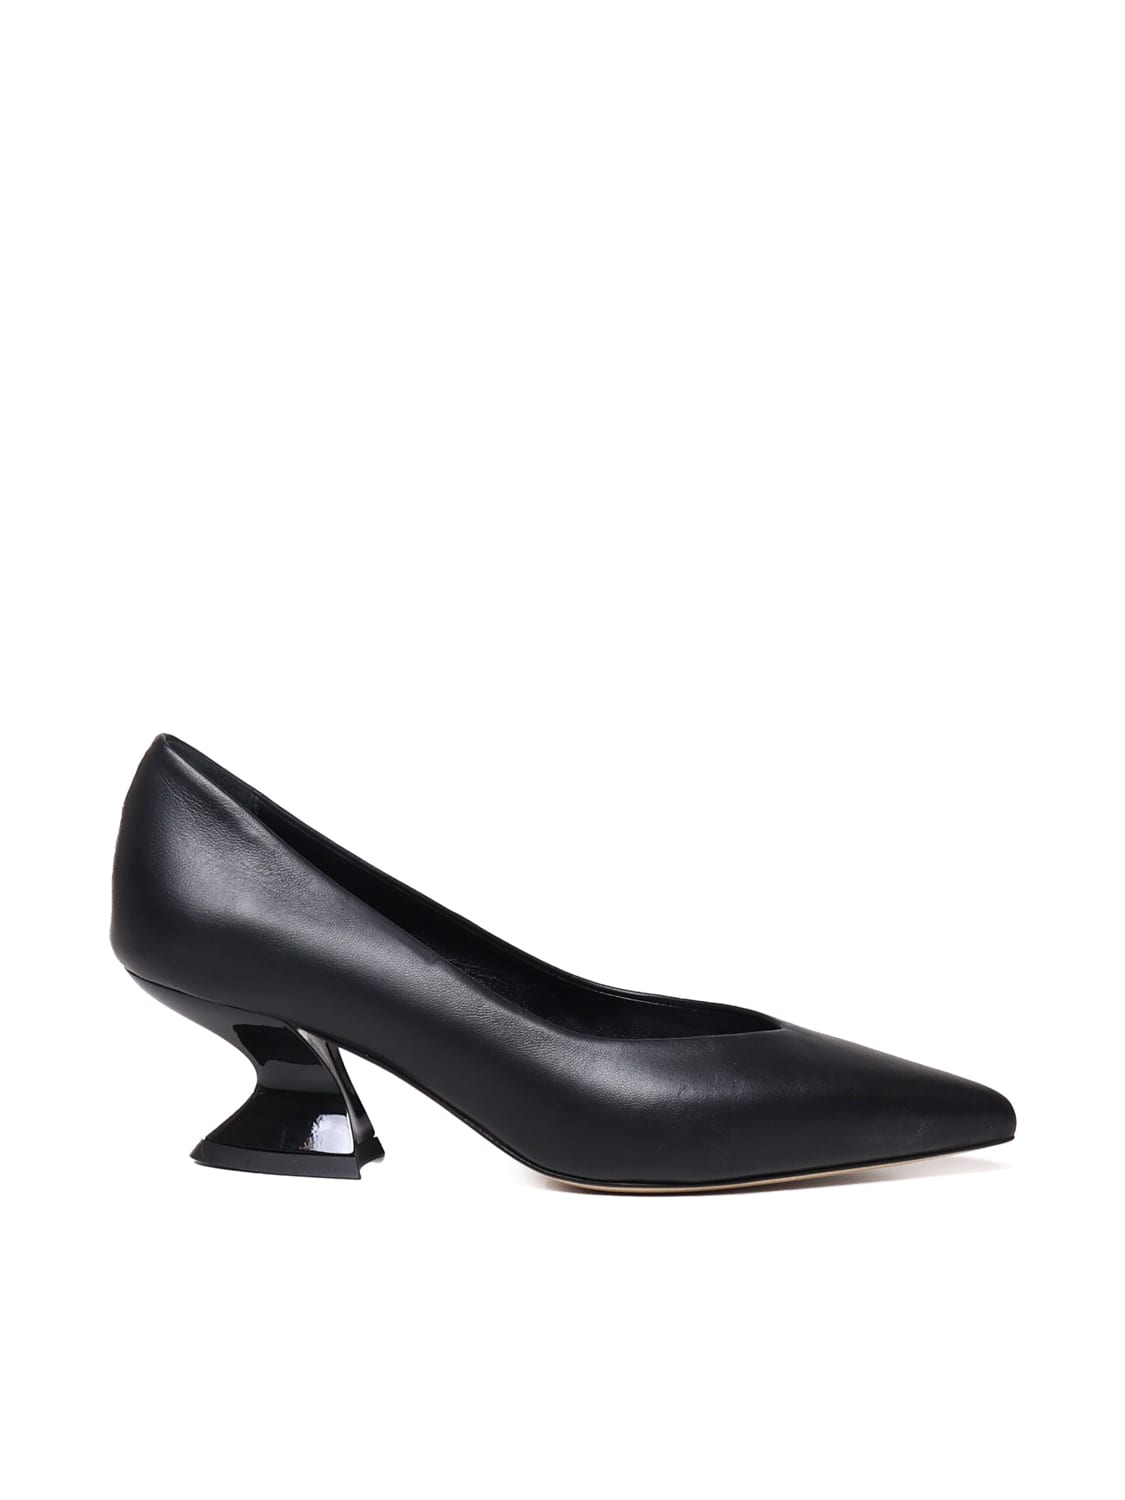 Leather Pumps With Wide Heel